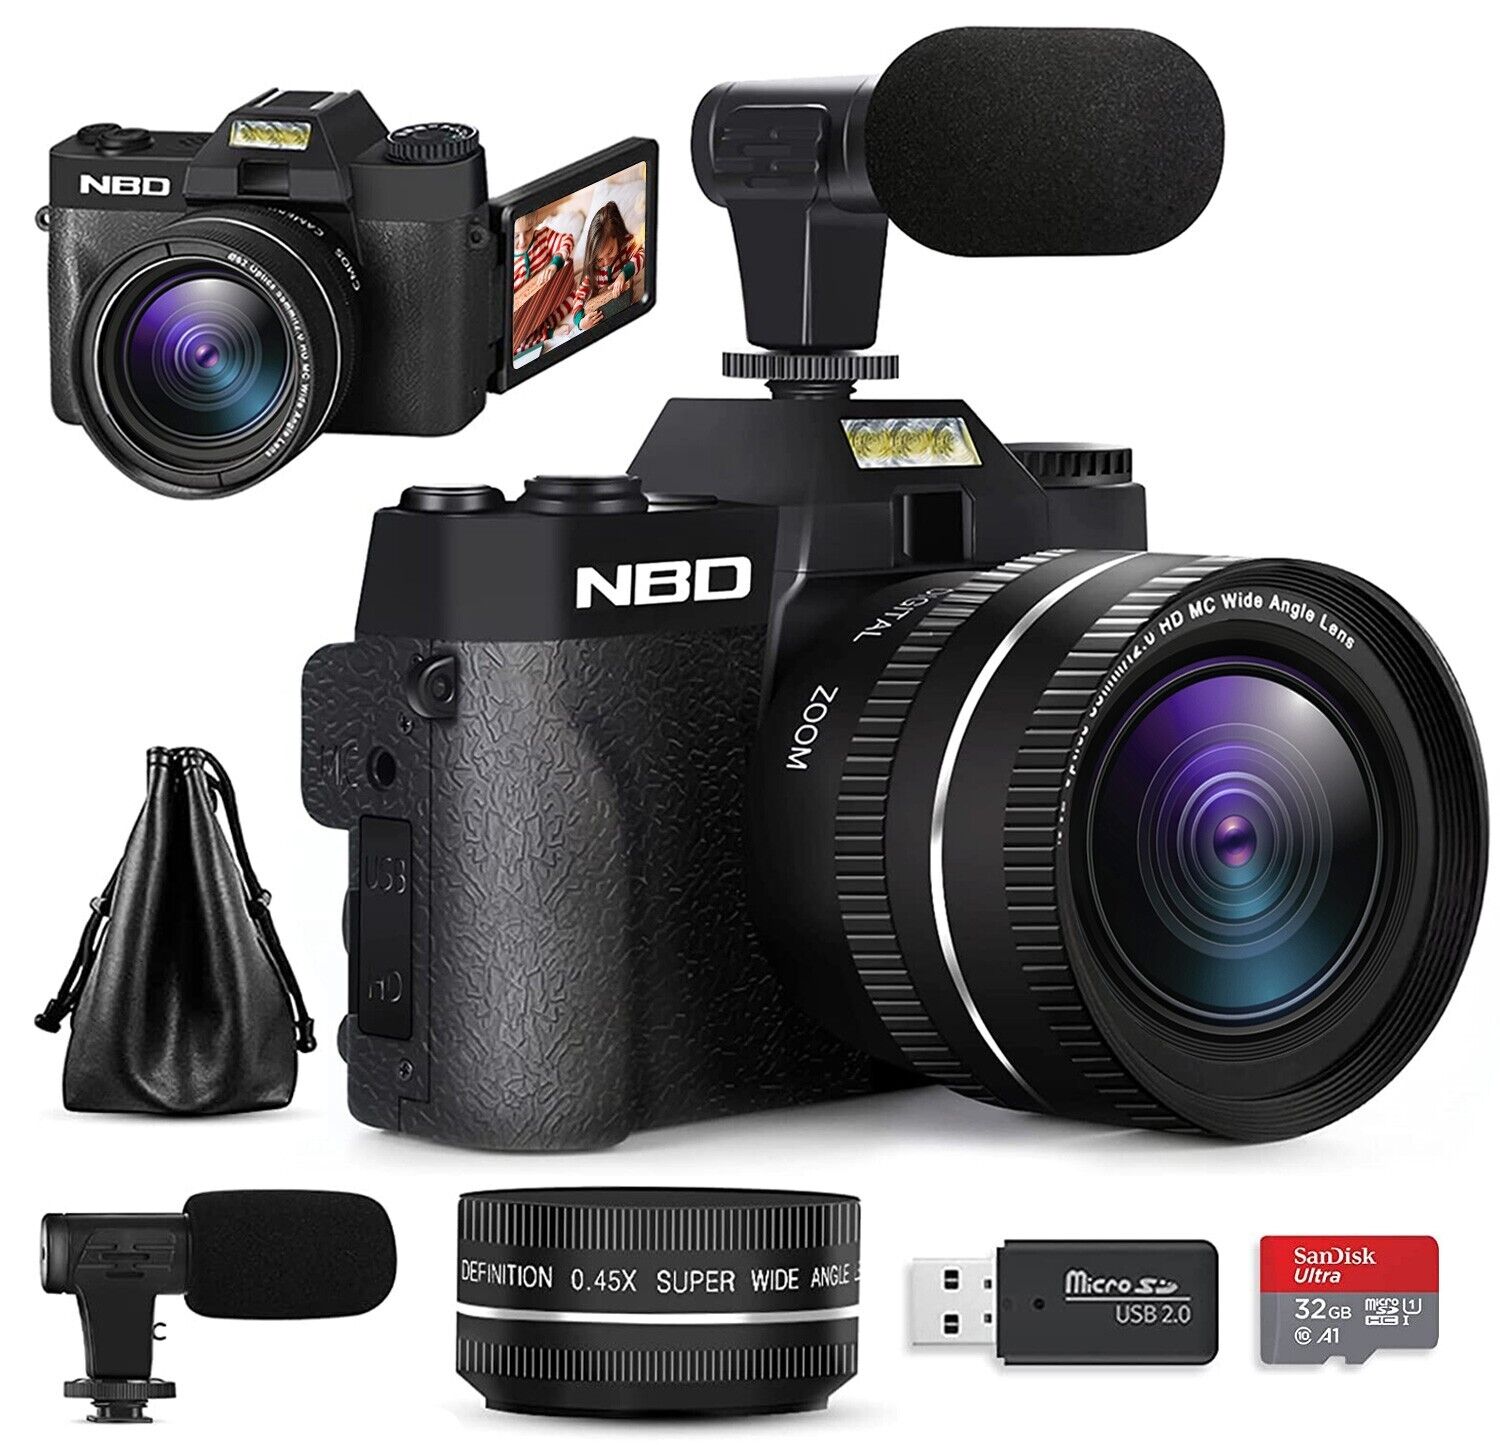 4K digital camera for YouTube 3.0 "48MP video recording with 16x digital zoom NBD Nbro